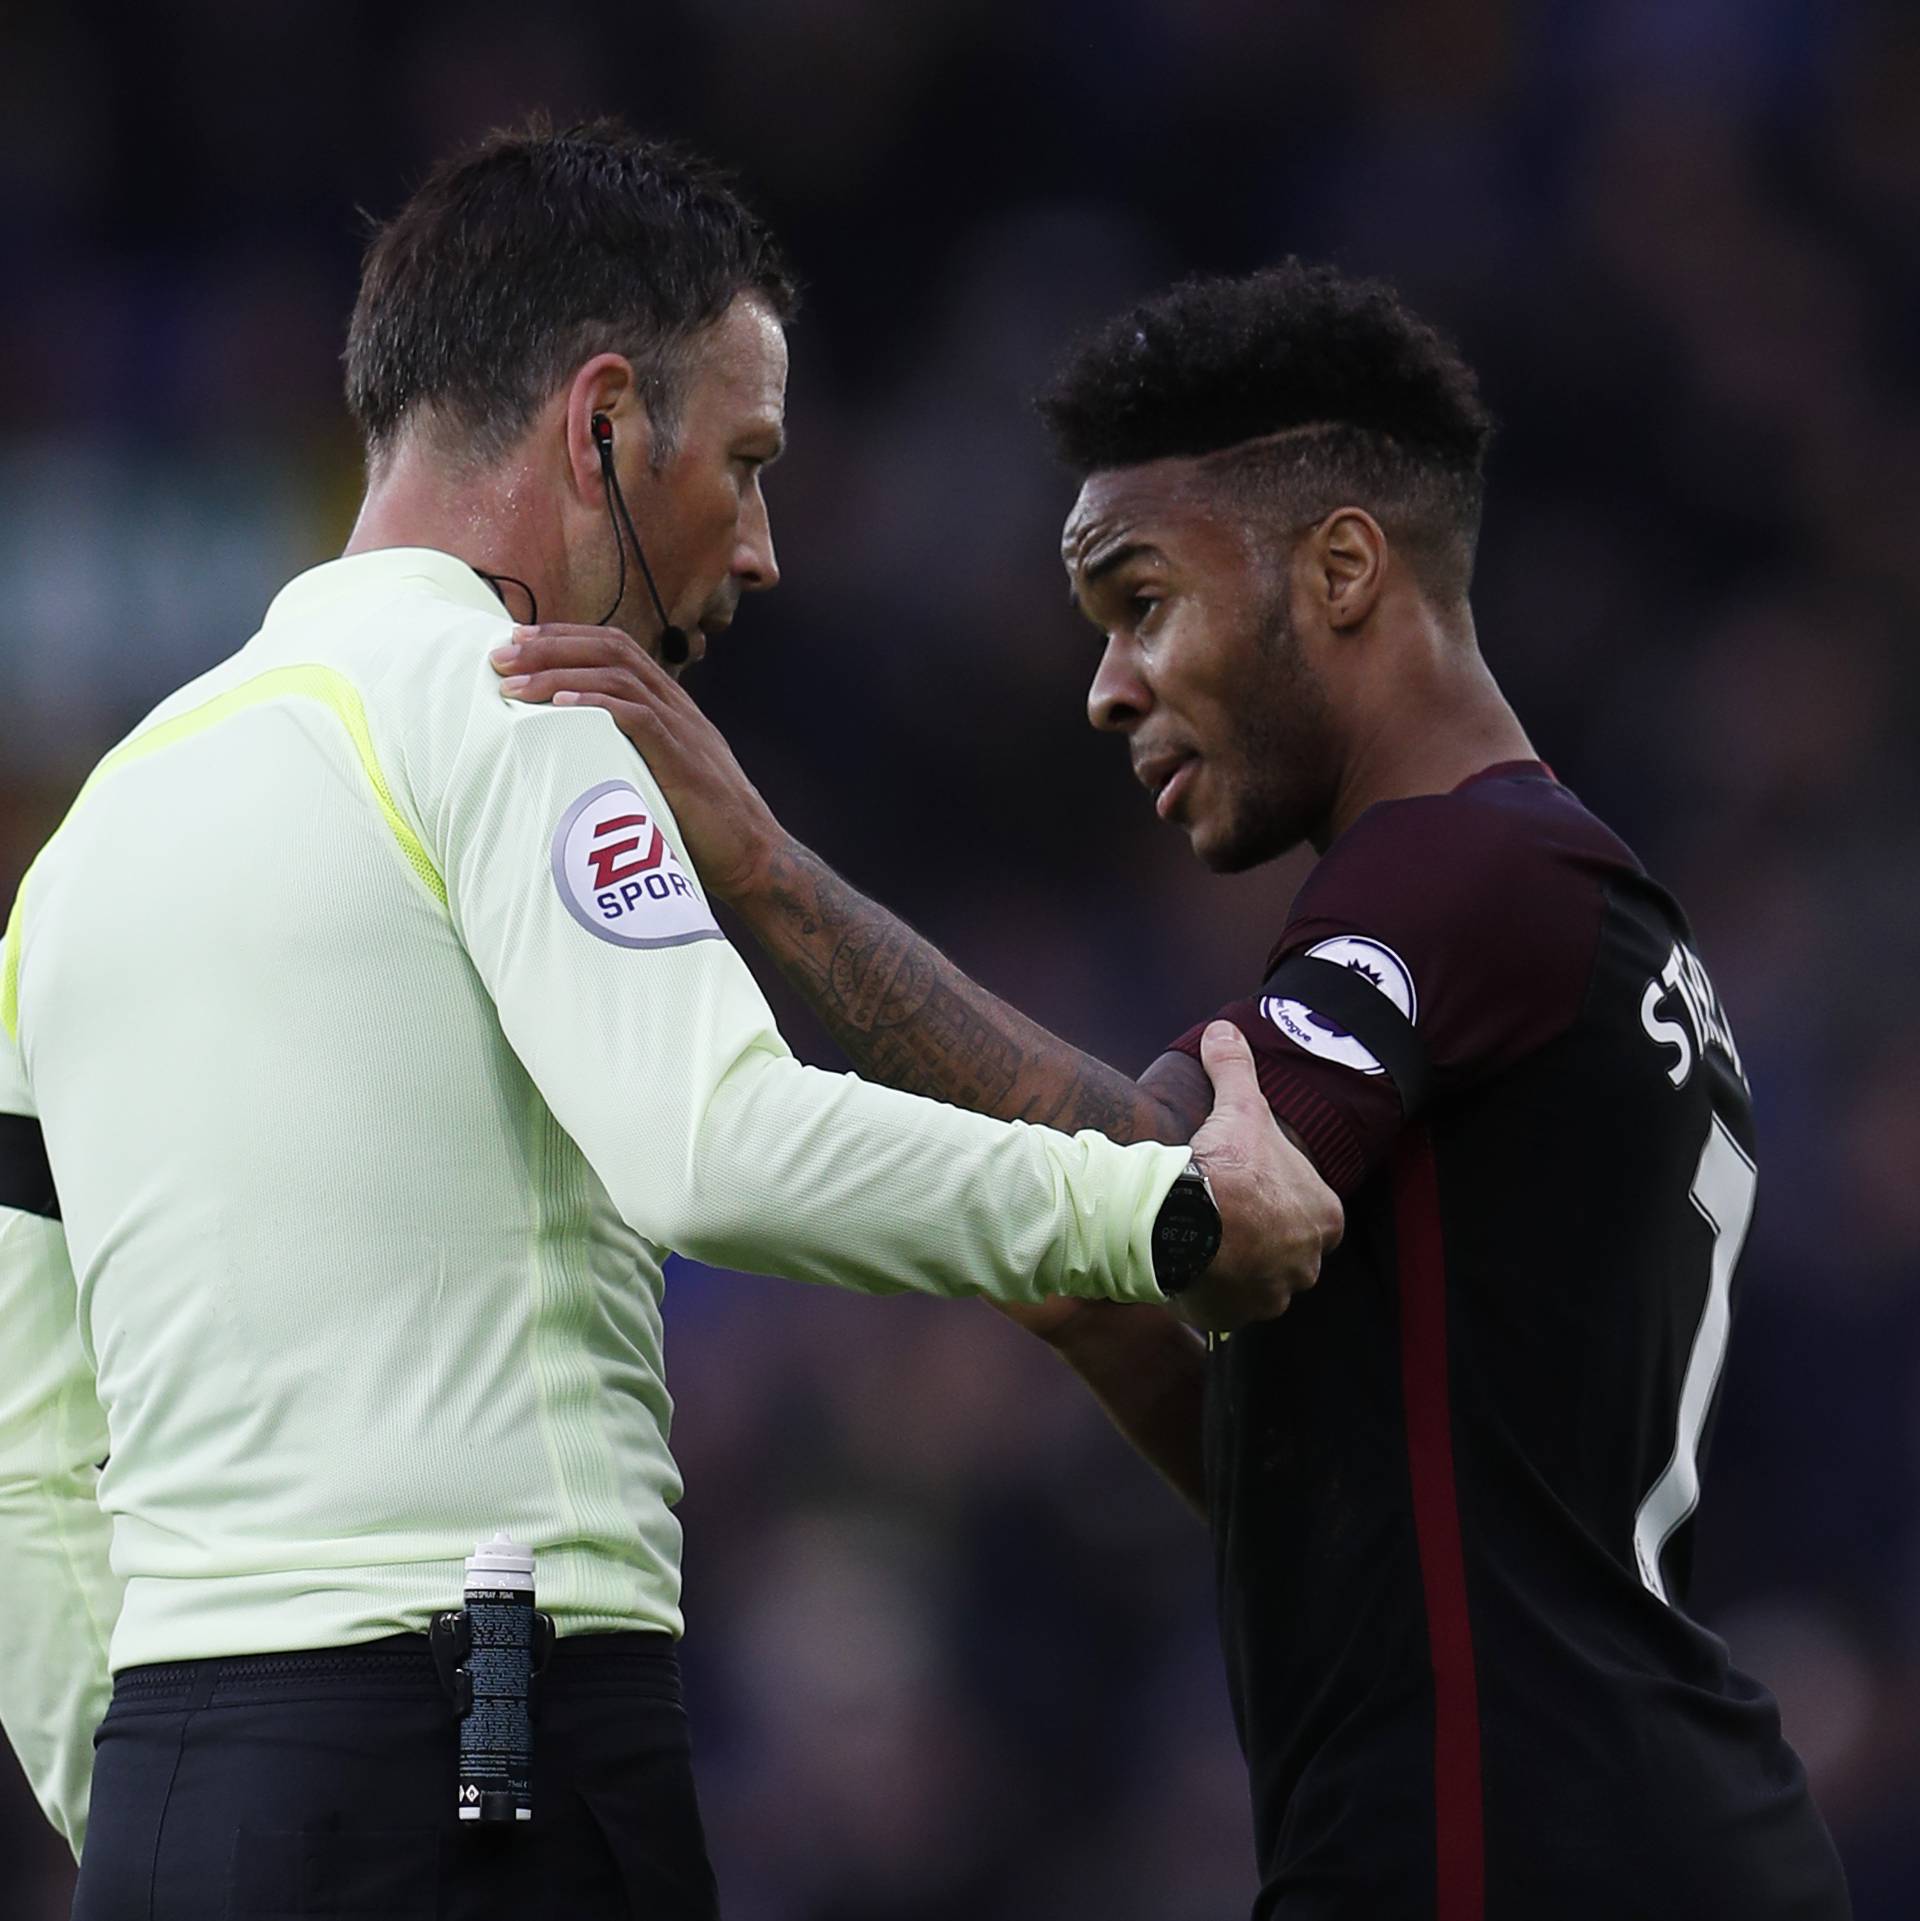 Manchester City's Raheem Sterling speaks with referee Mark Clattenburg at half time